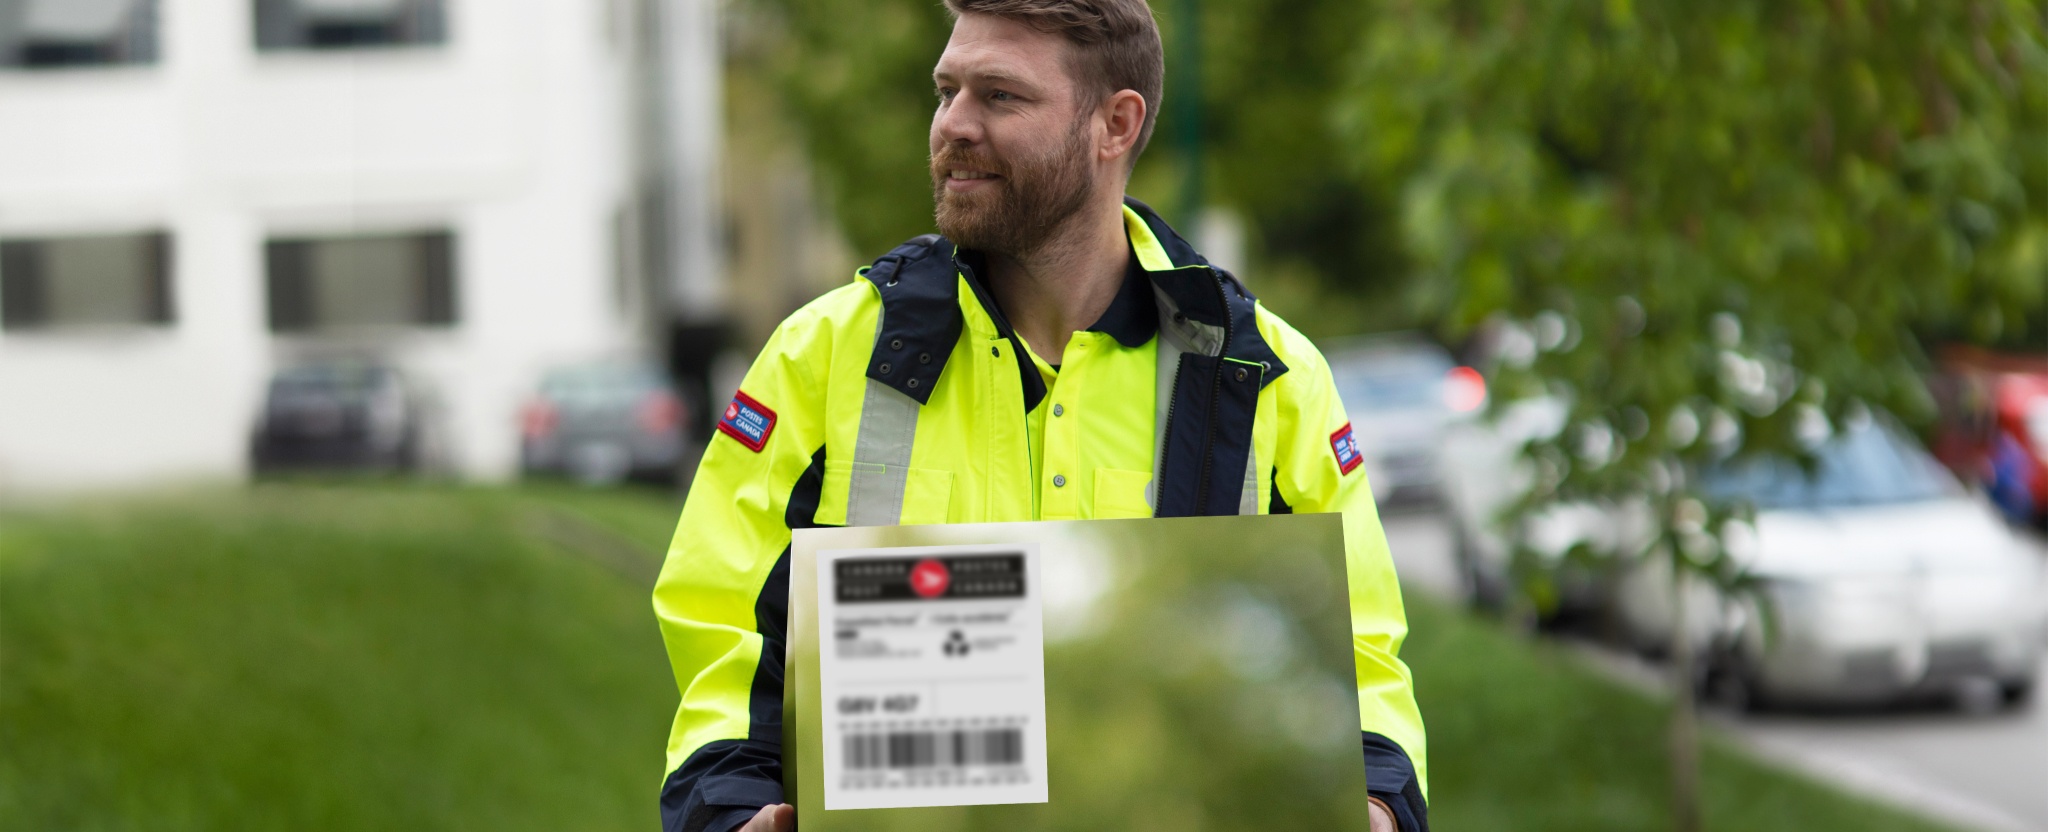 A Canada Post employee carries a carbon- neutral package for delivery.